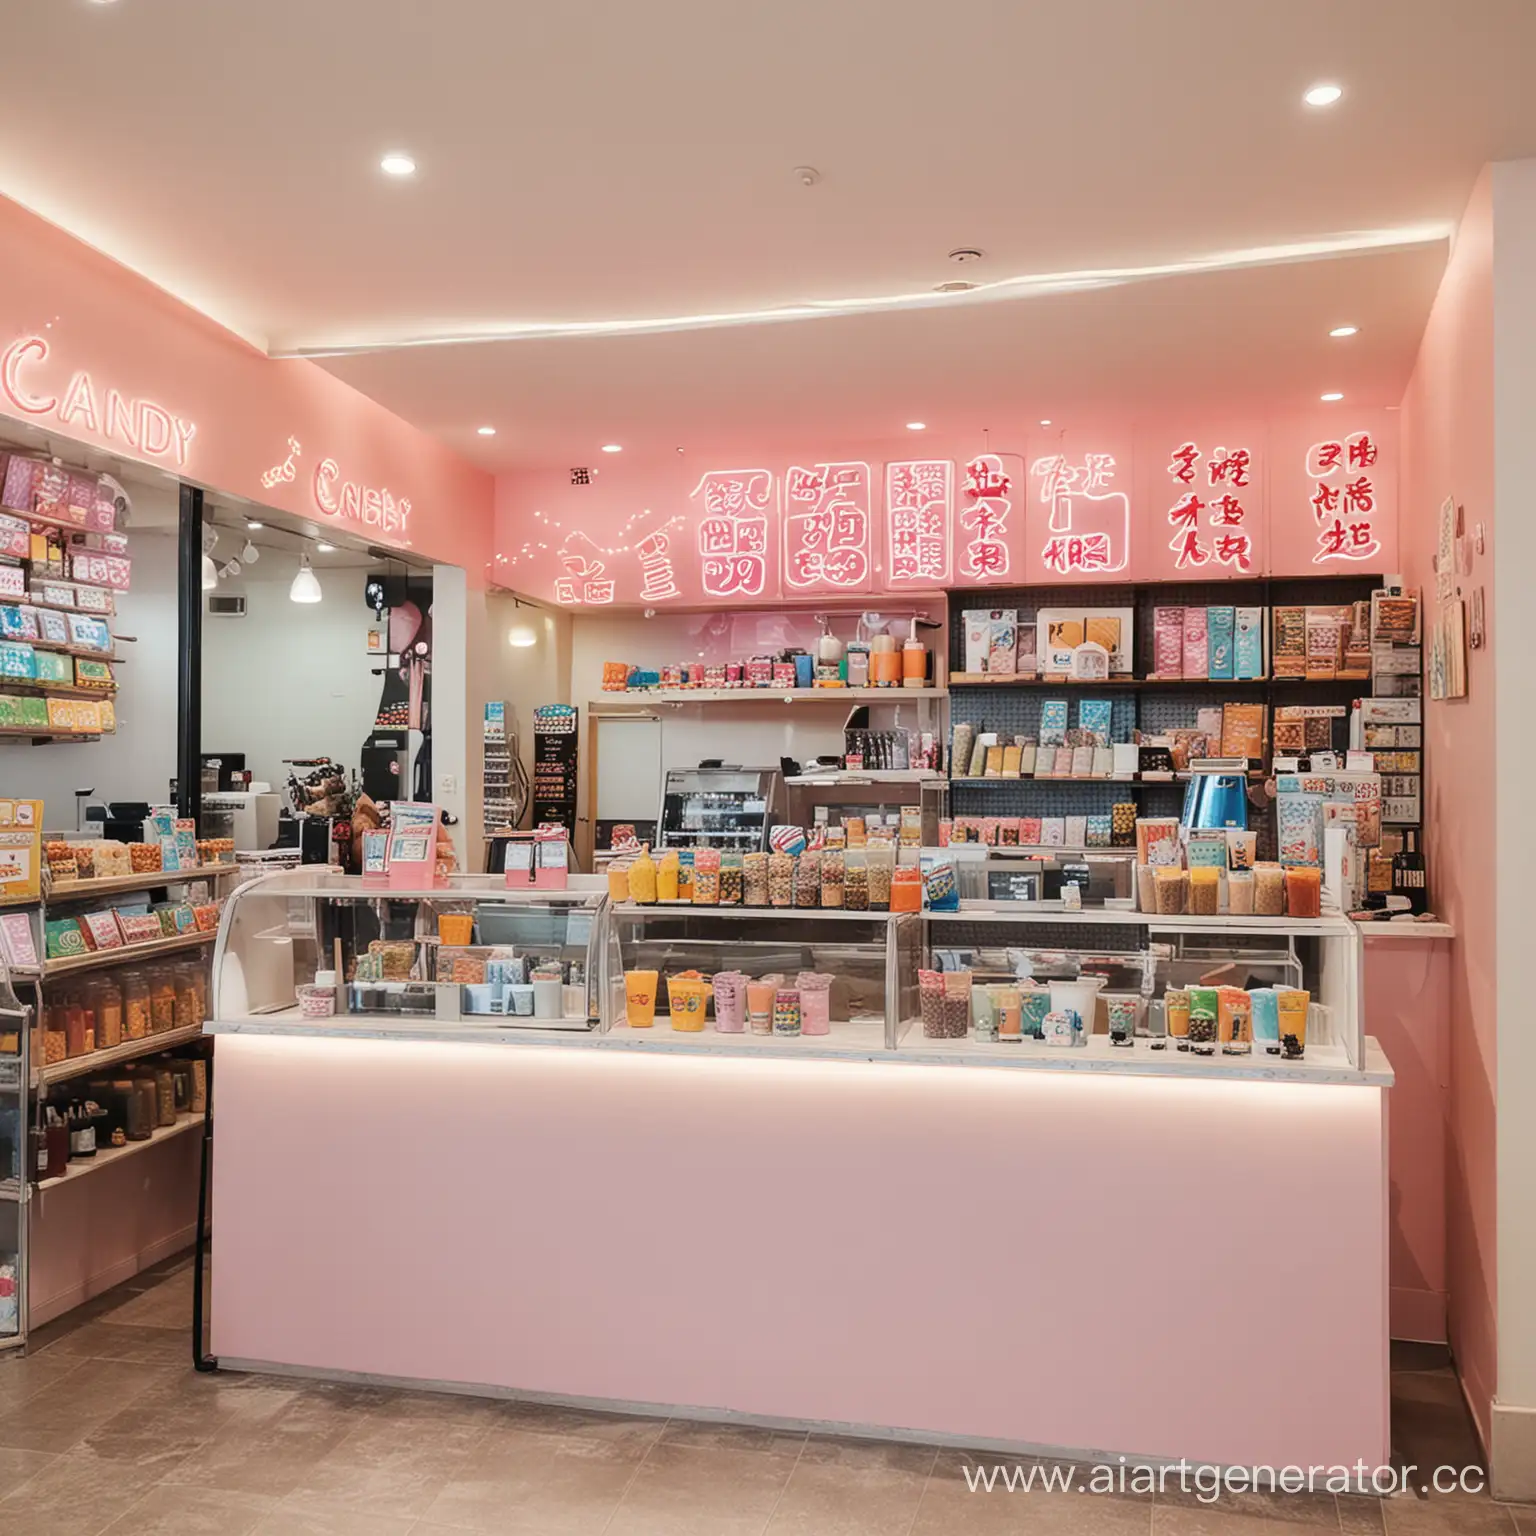 Colorful-Candy-Shop-Interior-with-Bubble-Tea-Counter